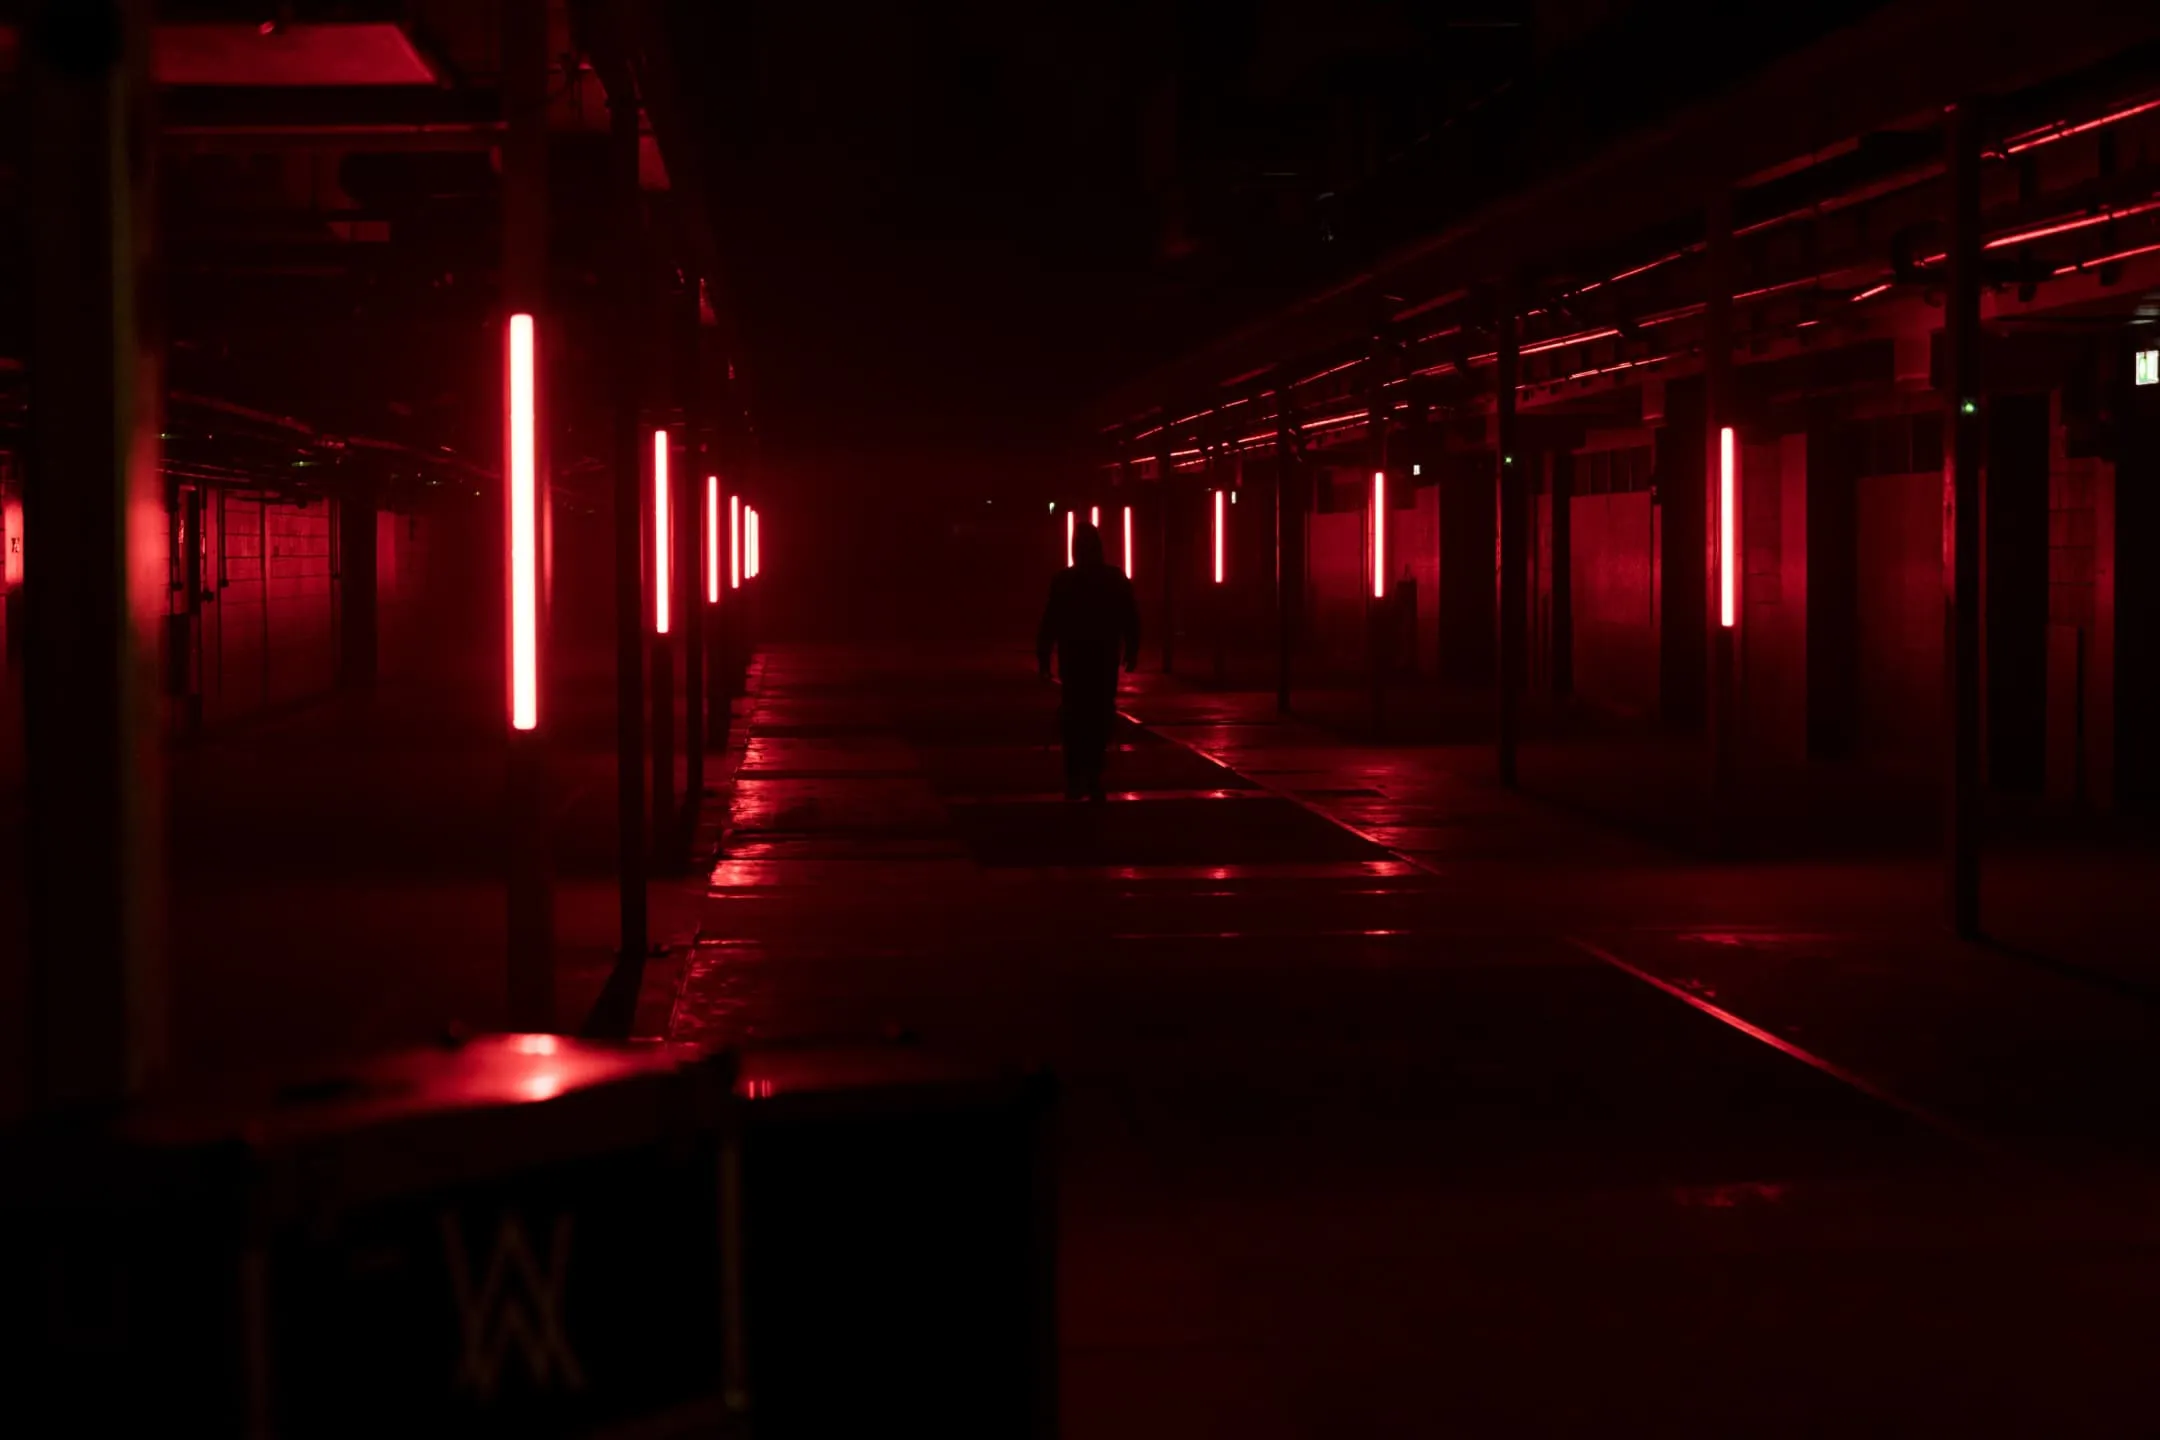 Alan Walker walking away from the camera in an empty building full of red lights.